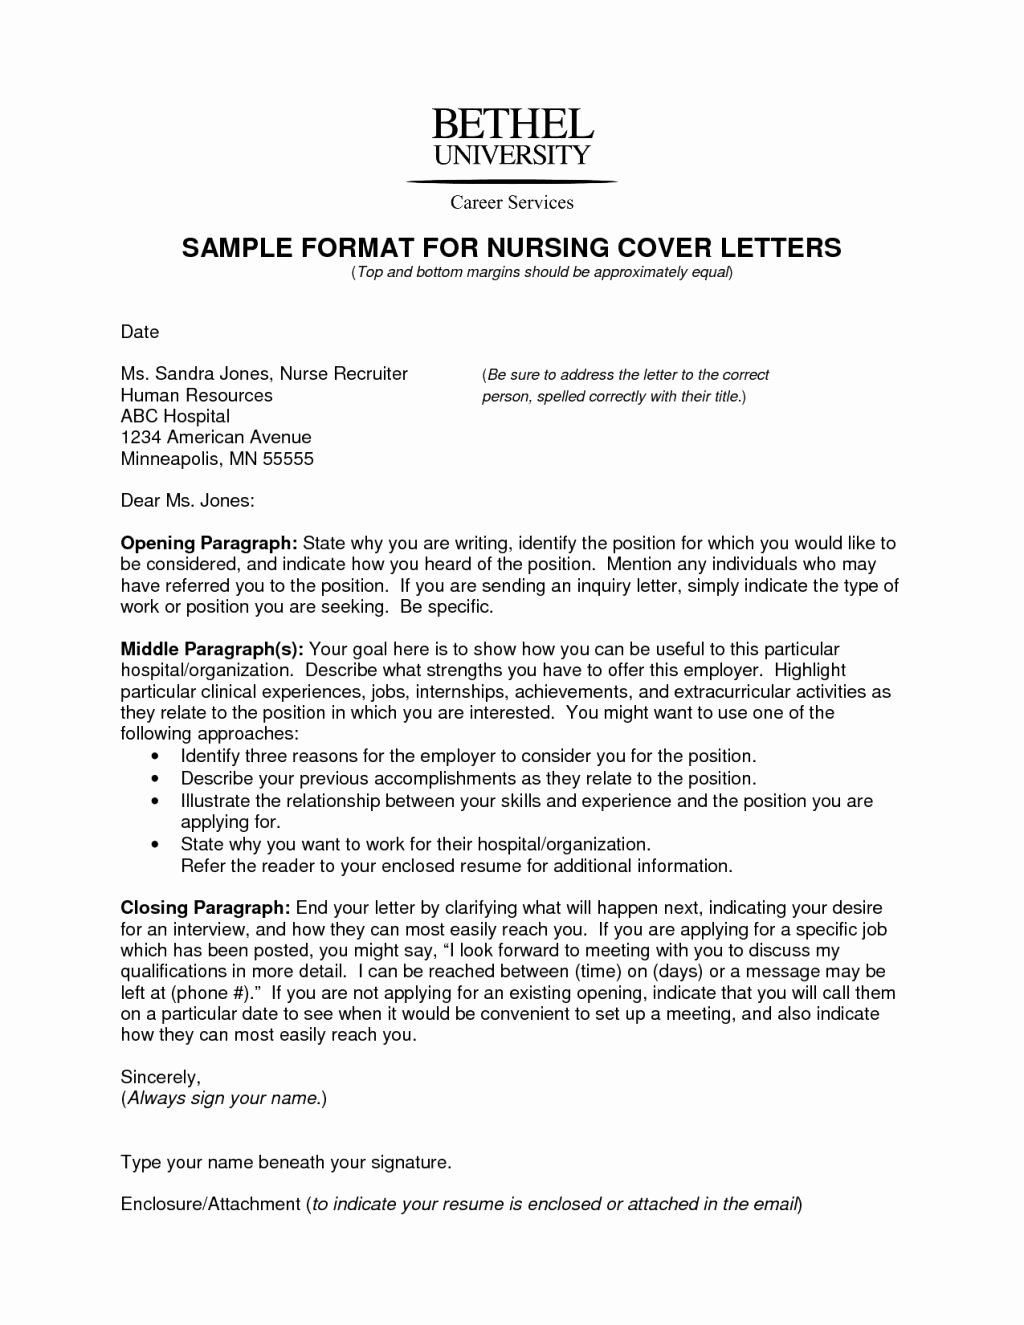 Graduate Nurse Cover Letter Examples New Cover Letter Sample for Fresh Nursing Graduate Graduate